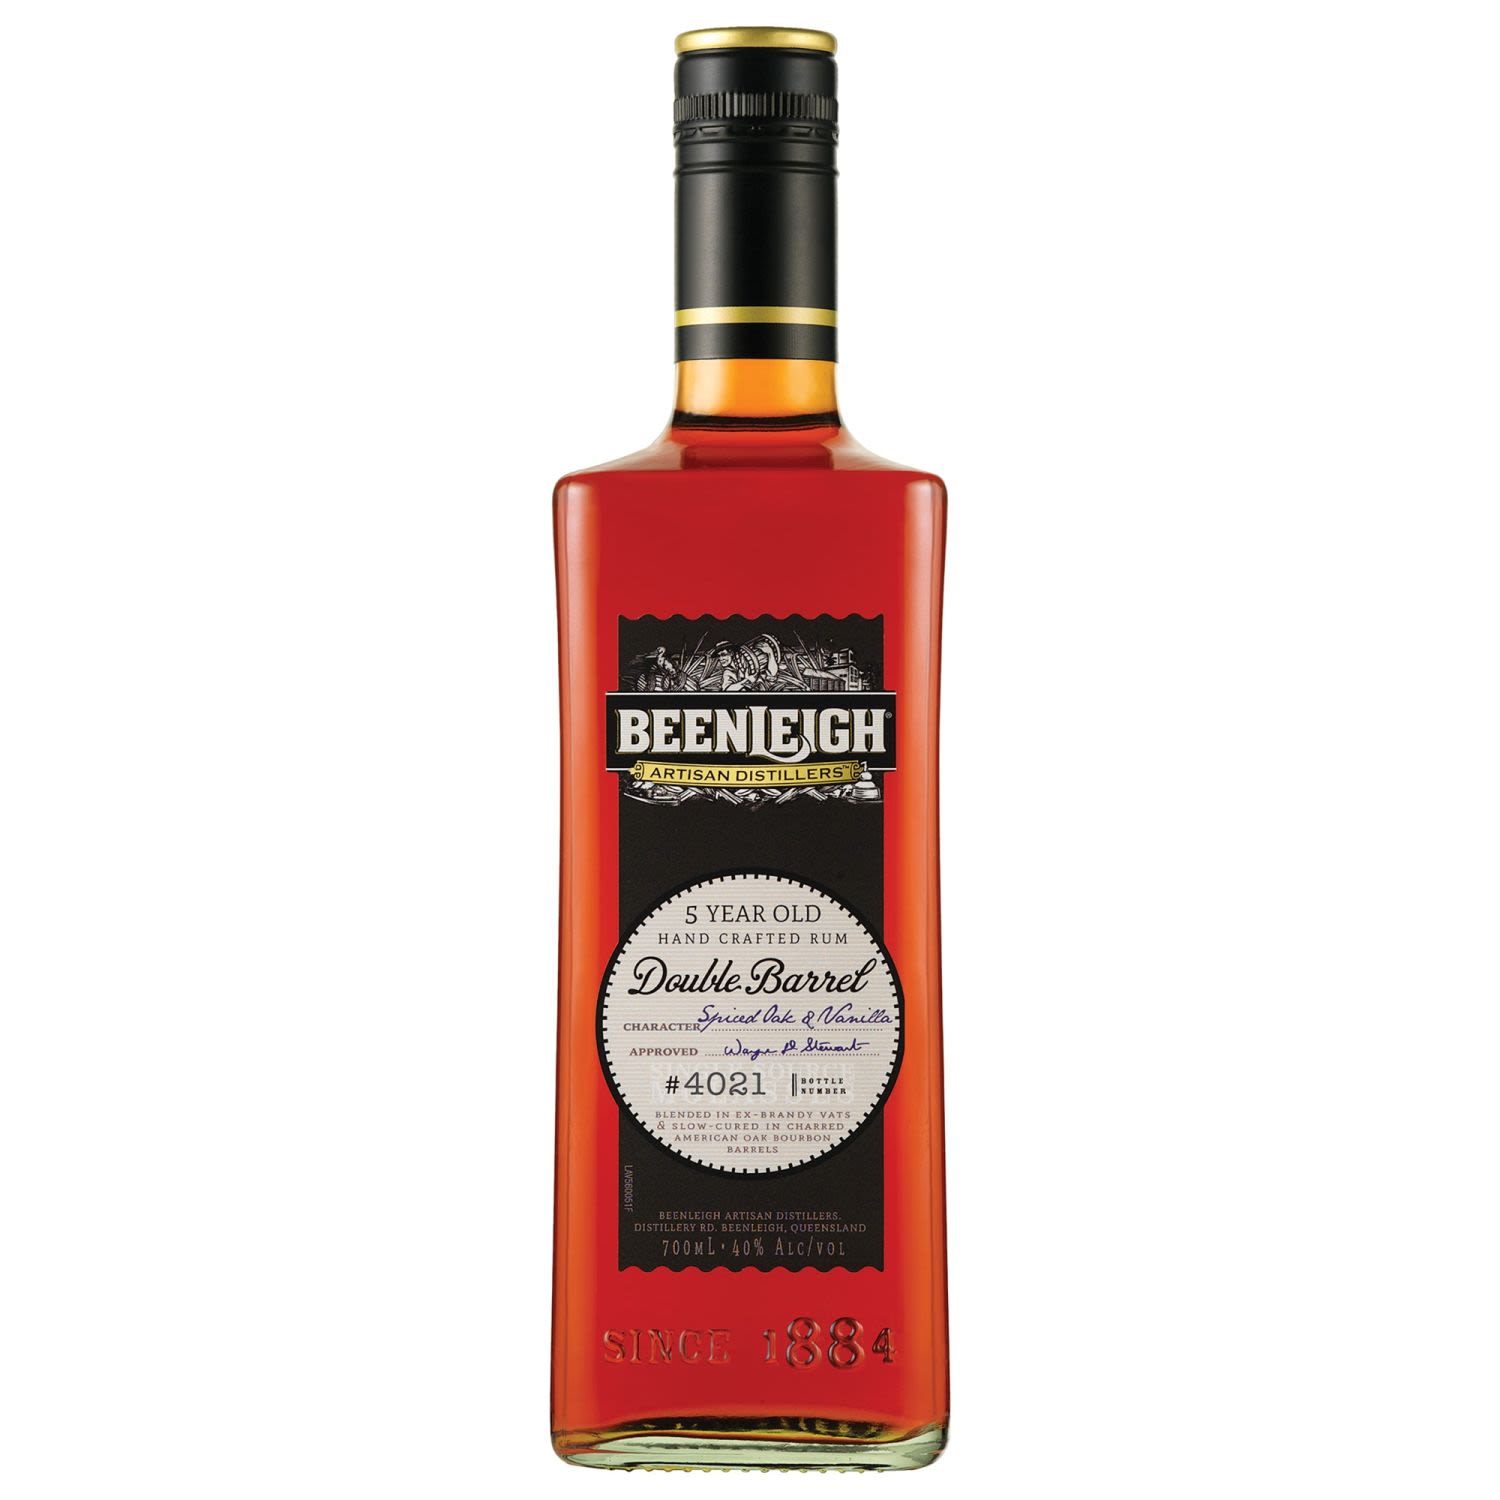 Beenleigh Double Barrel Hand-crafted 5 Year Old 700mL Bottle